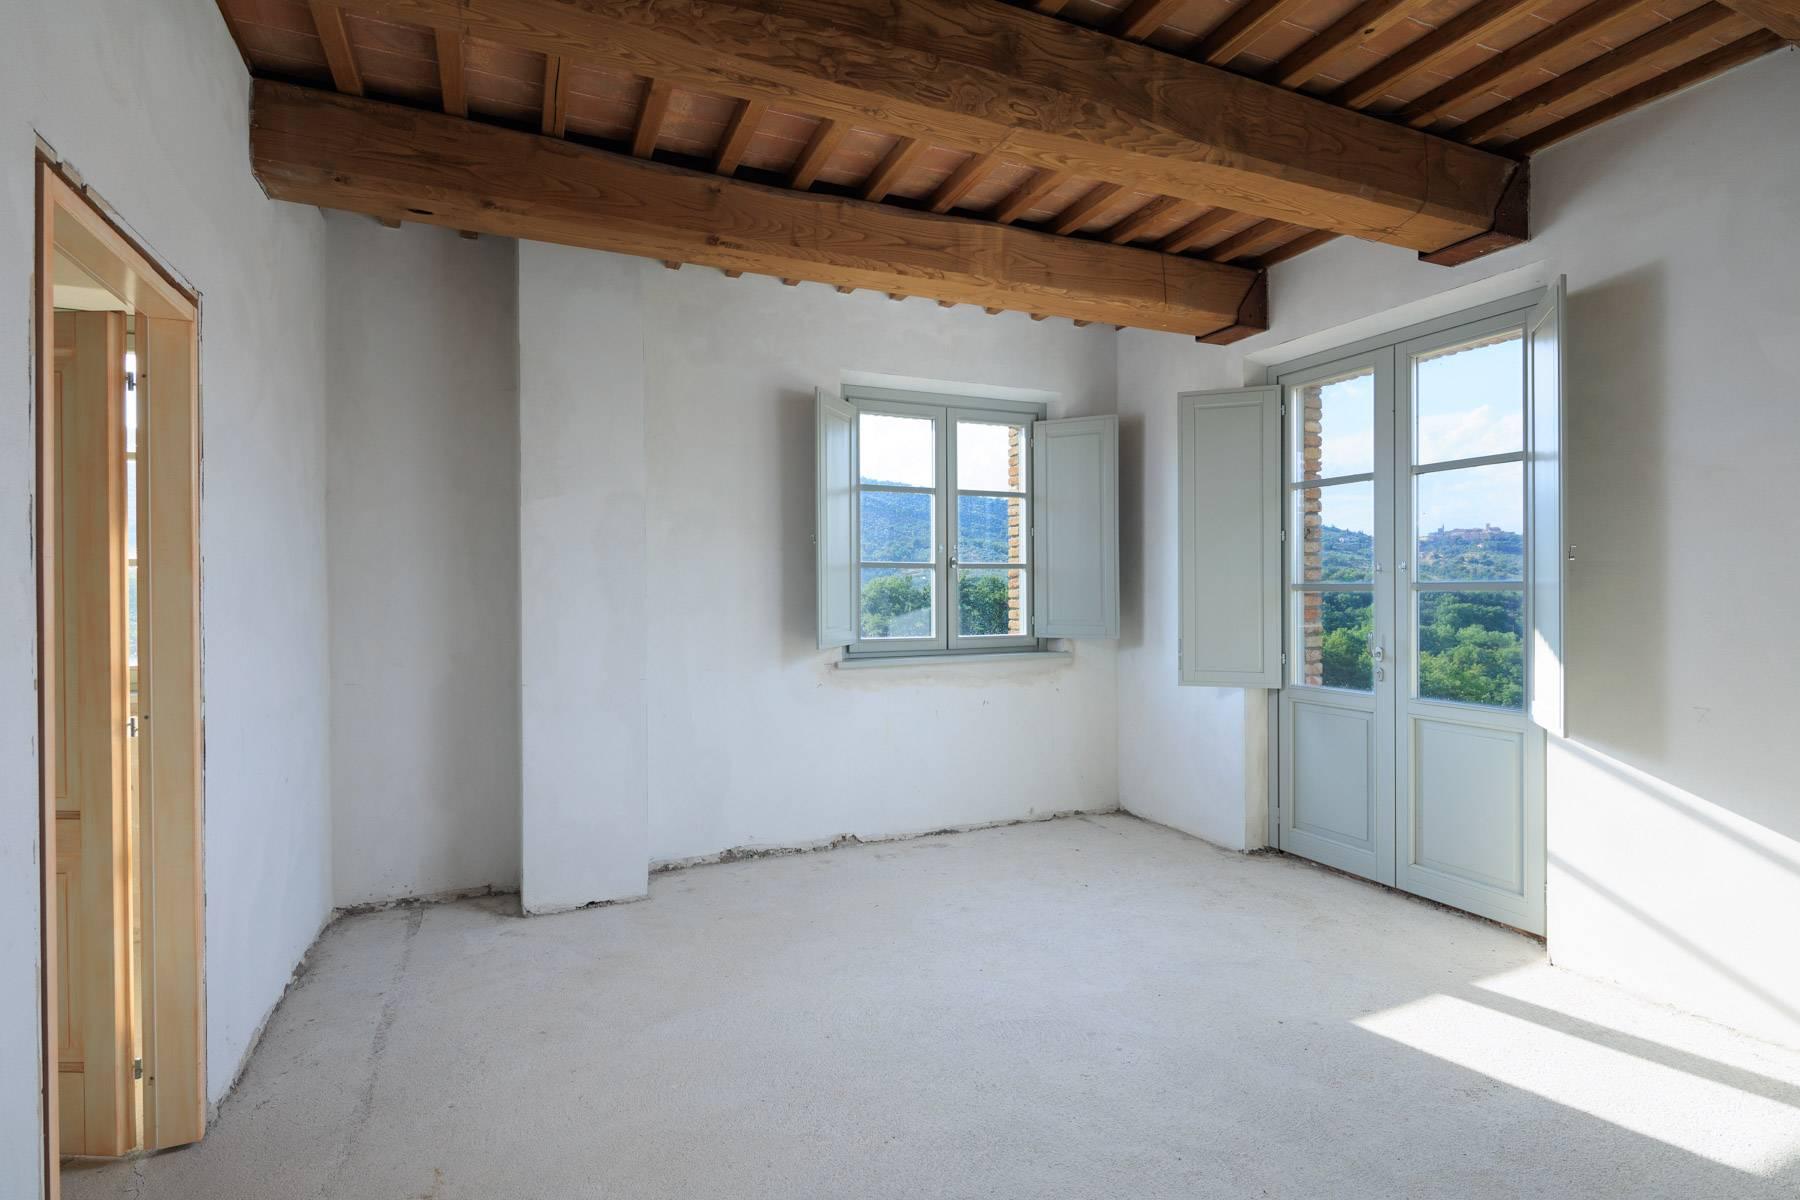 Unfinished Country house with magnificent views in Panicale - 11